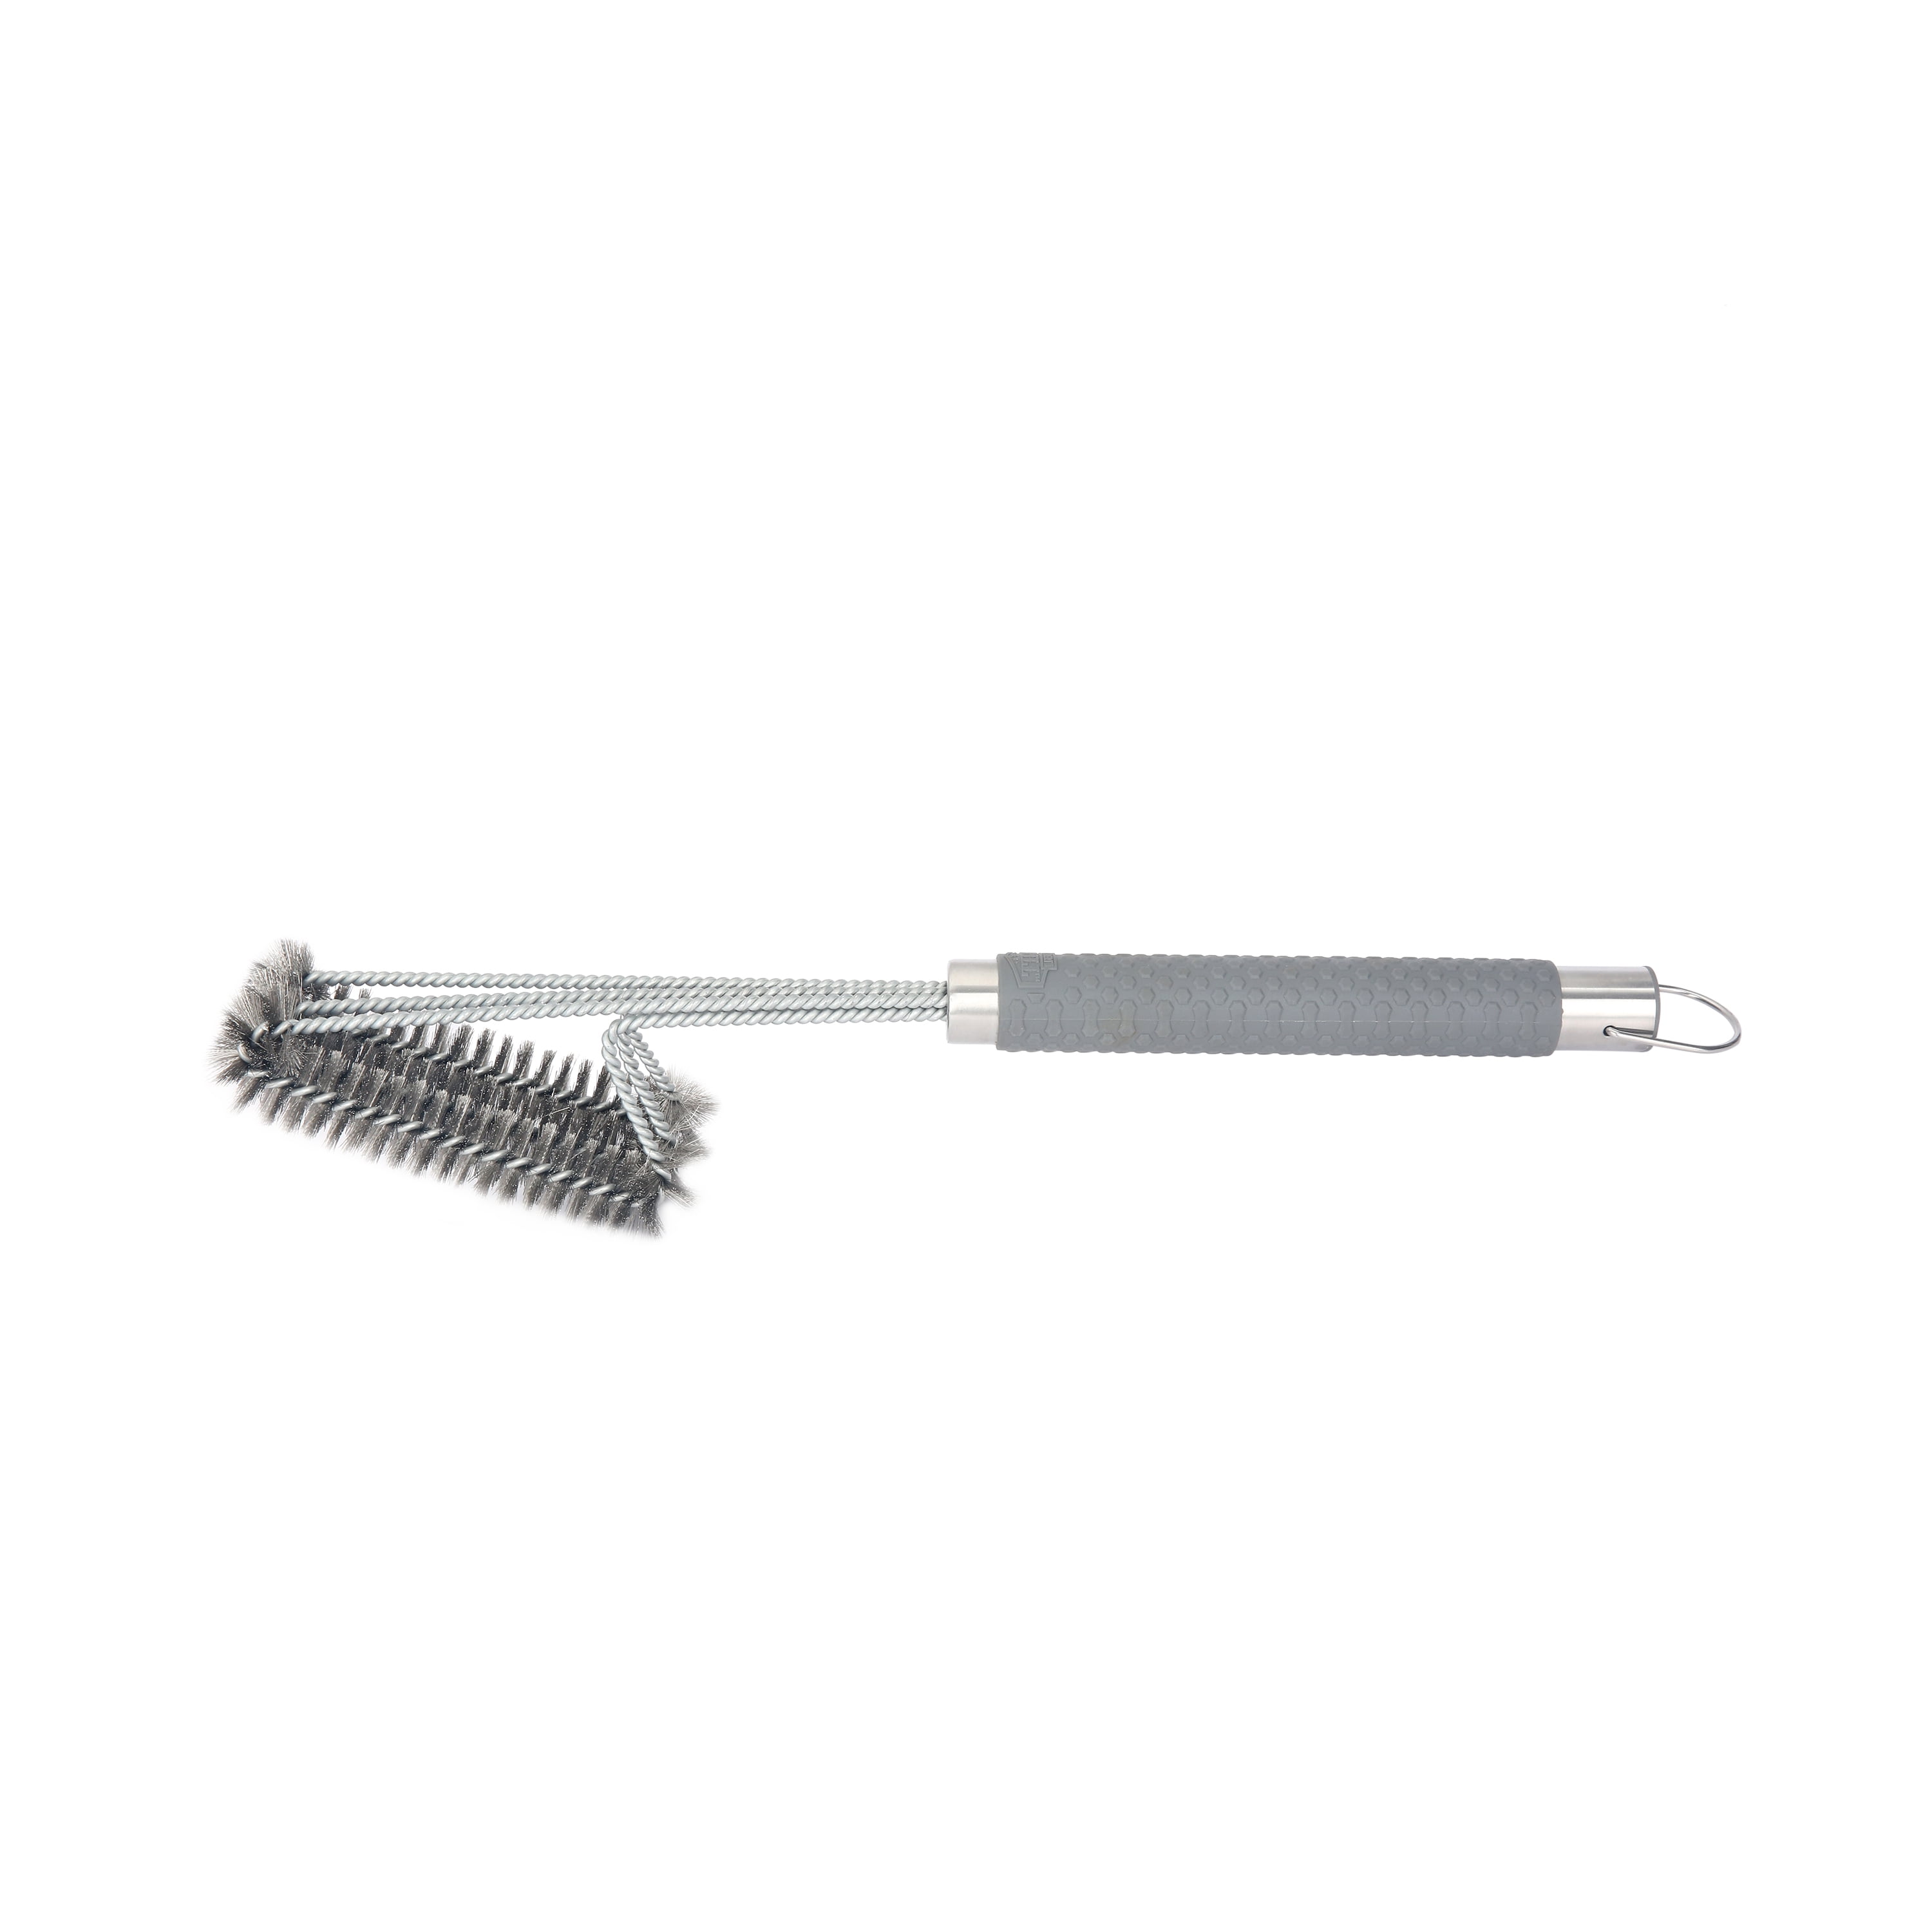 BBQ-AID Grill Brush Replacement Head, Bristle Free Grill Cleaning Brush -  Screwdriver Included, for 2021 Model Grill Brush and Scraper. No Scratch